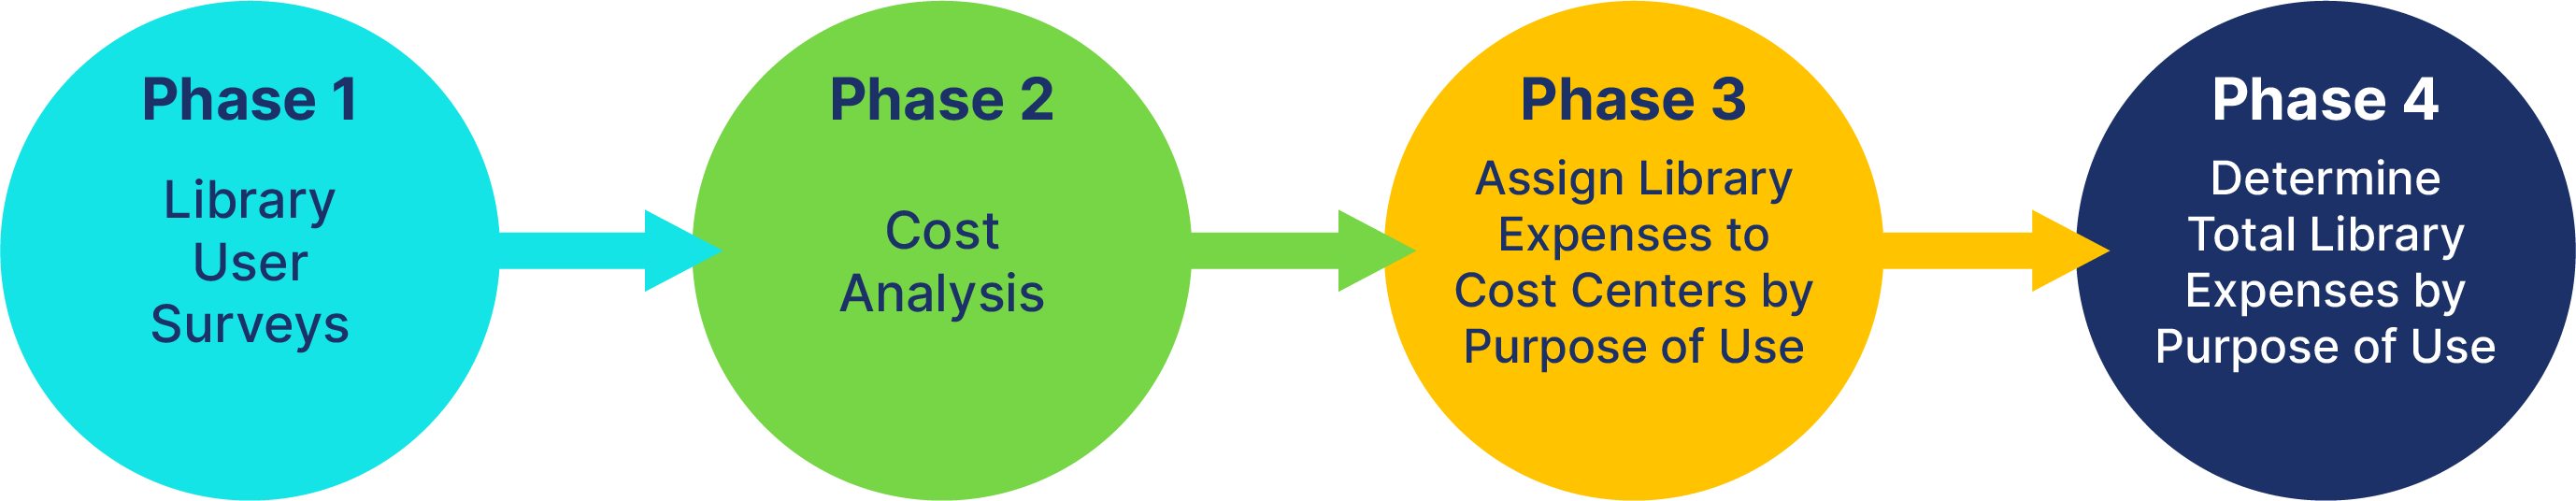 Phase 1: Library User Surveys
Phase 2: Cost Analysis
Phase 3: Assign Library Expenses to Cost Centers by Purpose of Use
Phase 4: Determine total Library Expenses by Purpose of Use